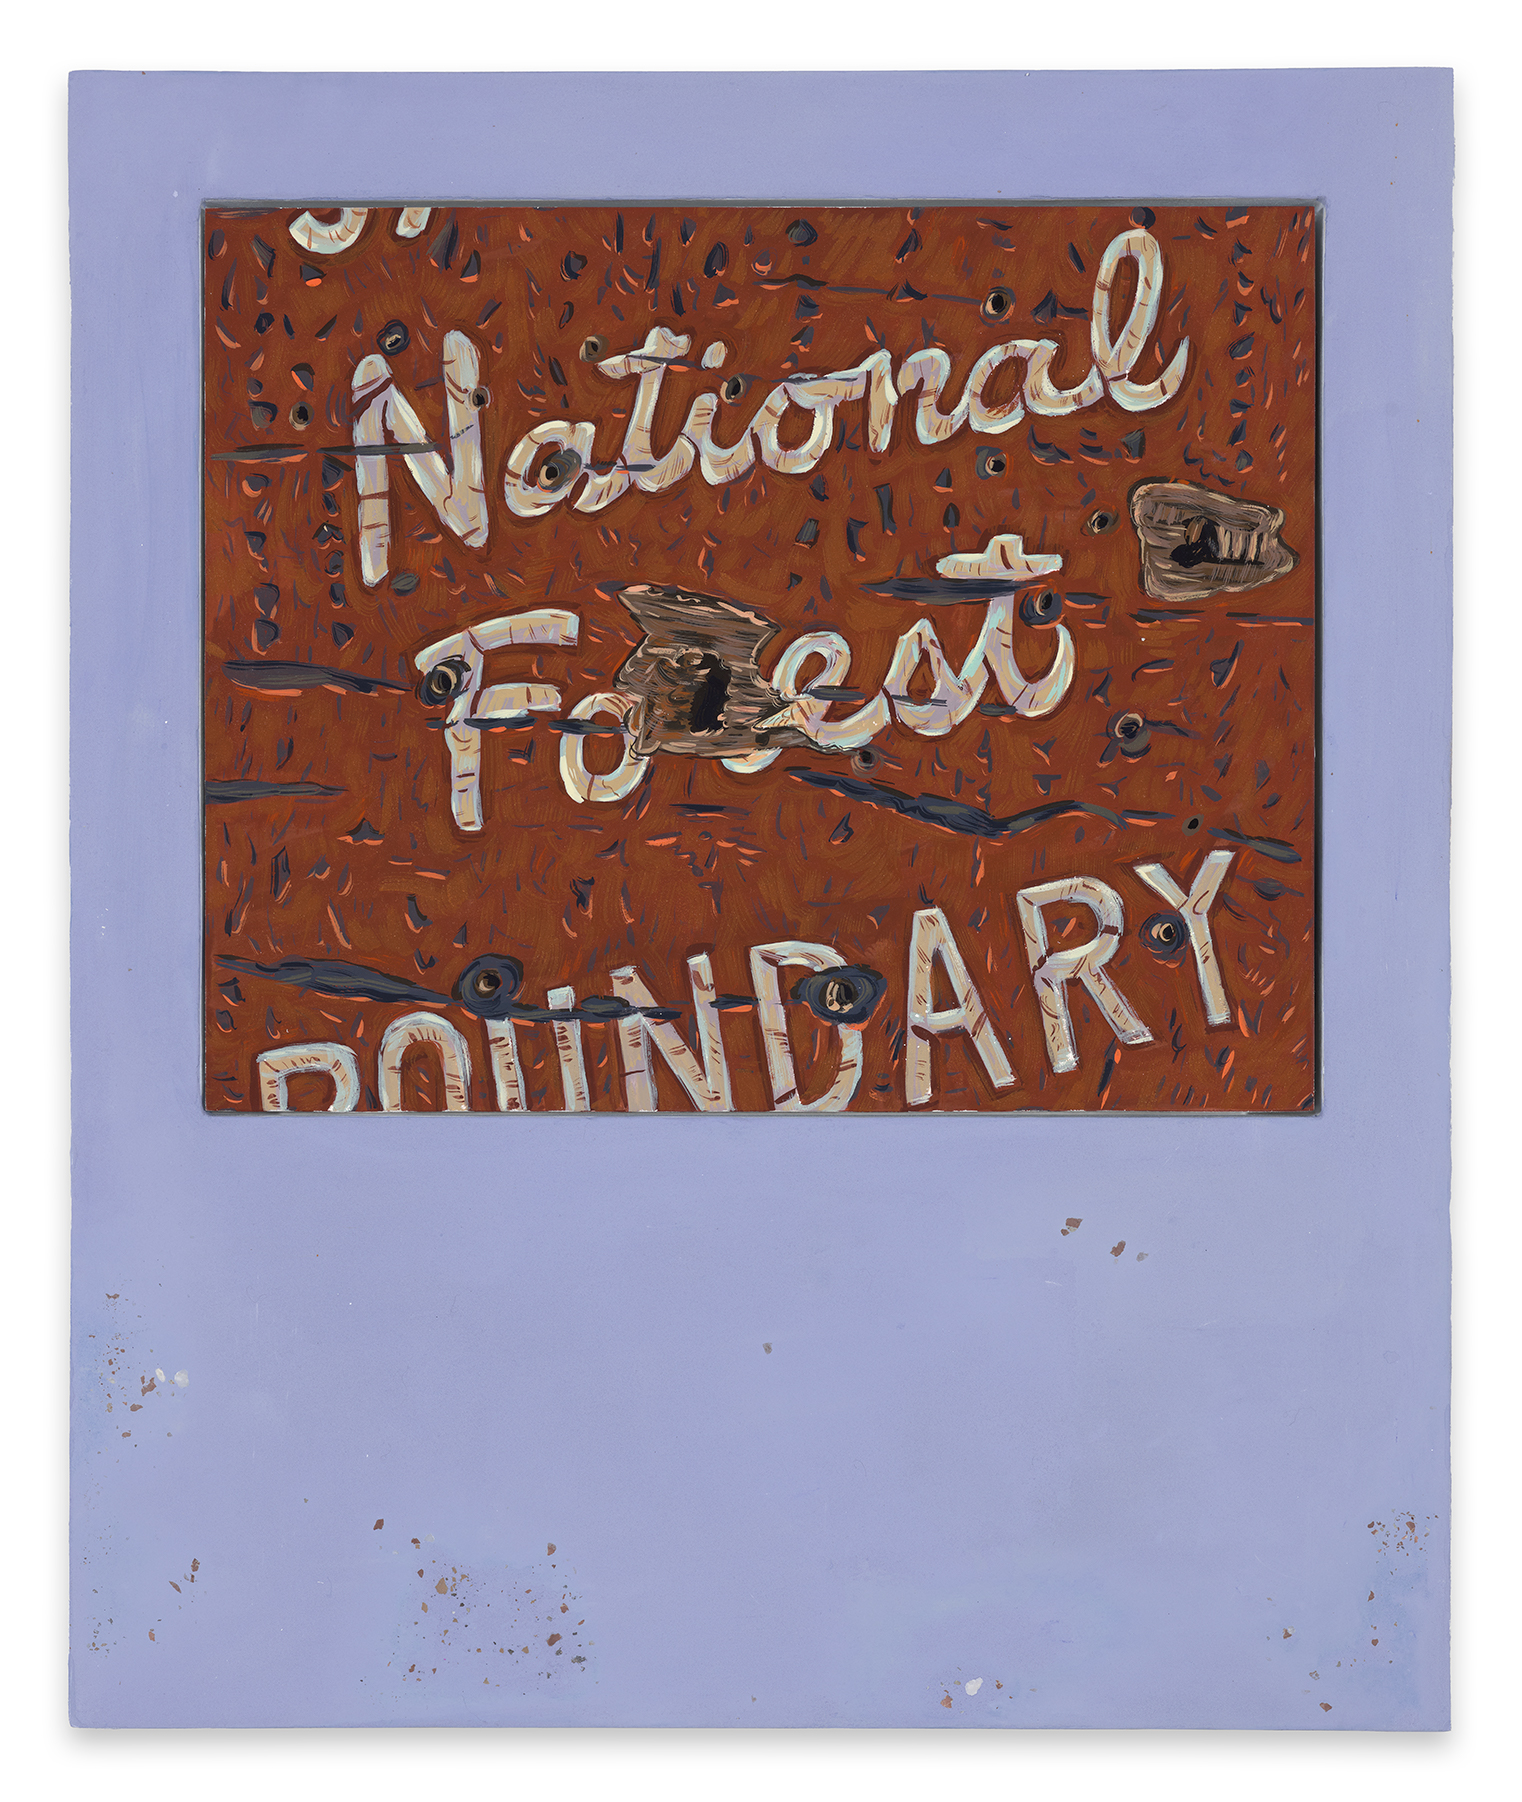 This image shows a painting which is framed in a pigmented pastel purple panel that includes fragments of earth and rocks from the sites where the paintings were made. The painting is a composition that re-creates a National Forest sign as a brown target, where the picture plane becomes a mottled surface representing bullets holes and numerous abrasions and gouges. The background is composed of quick short brush strokes of browns, yellows, peach colors, grays, and blacks. The words, National and Forest, are superimposed diagonally, stacked as separate words, in large white cursive letters, over the battered background. The word Forest, spans the center of the painting where a large bullet hole has blasted through the letter R, like an entrance to a hidden cave. Emerging on a diagonal from the bottom left side of the painting is the partially obscured word Boundary – where the B, the O and the U are partially cut off in the picture plane.